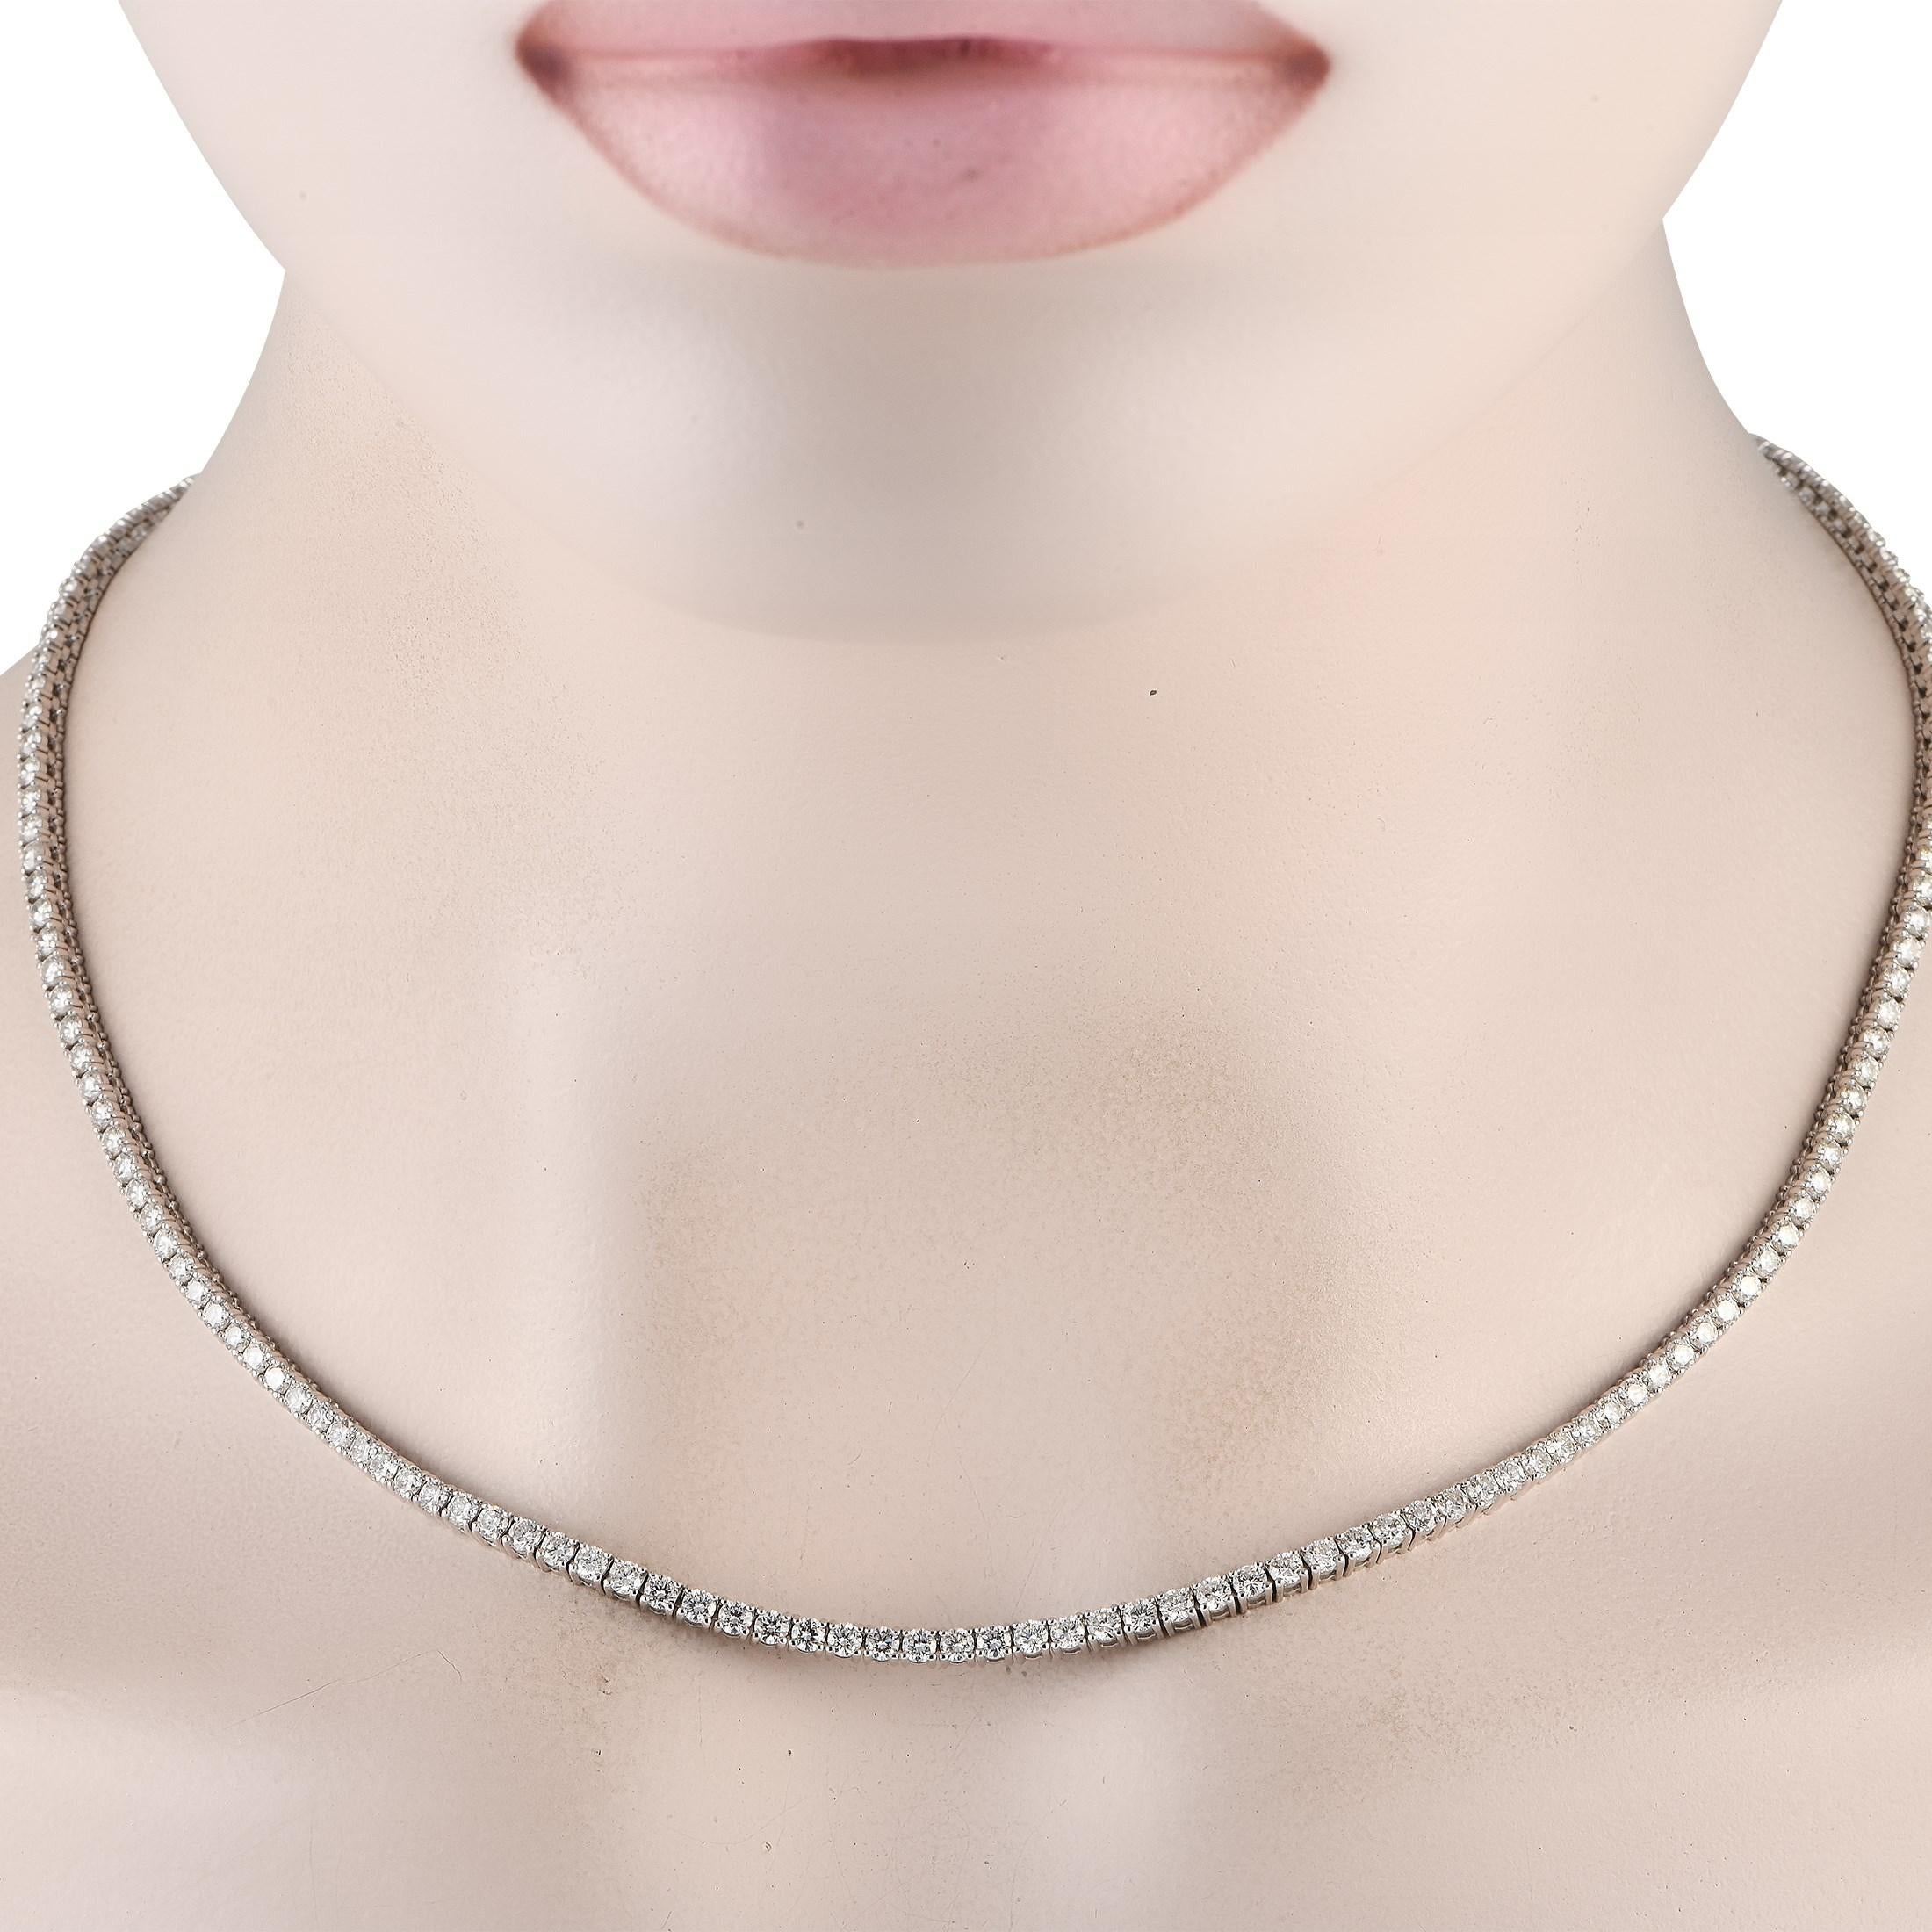 A series of sparkling round-cut Diamonds with a total weight of 10.32 carats make this luxury necklace endlessly impressive. Sleek, understated, and opulent, the simple 18K White Gold setting measures 18.5 long and allows the dazzling gemstones to